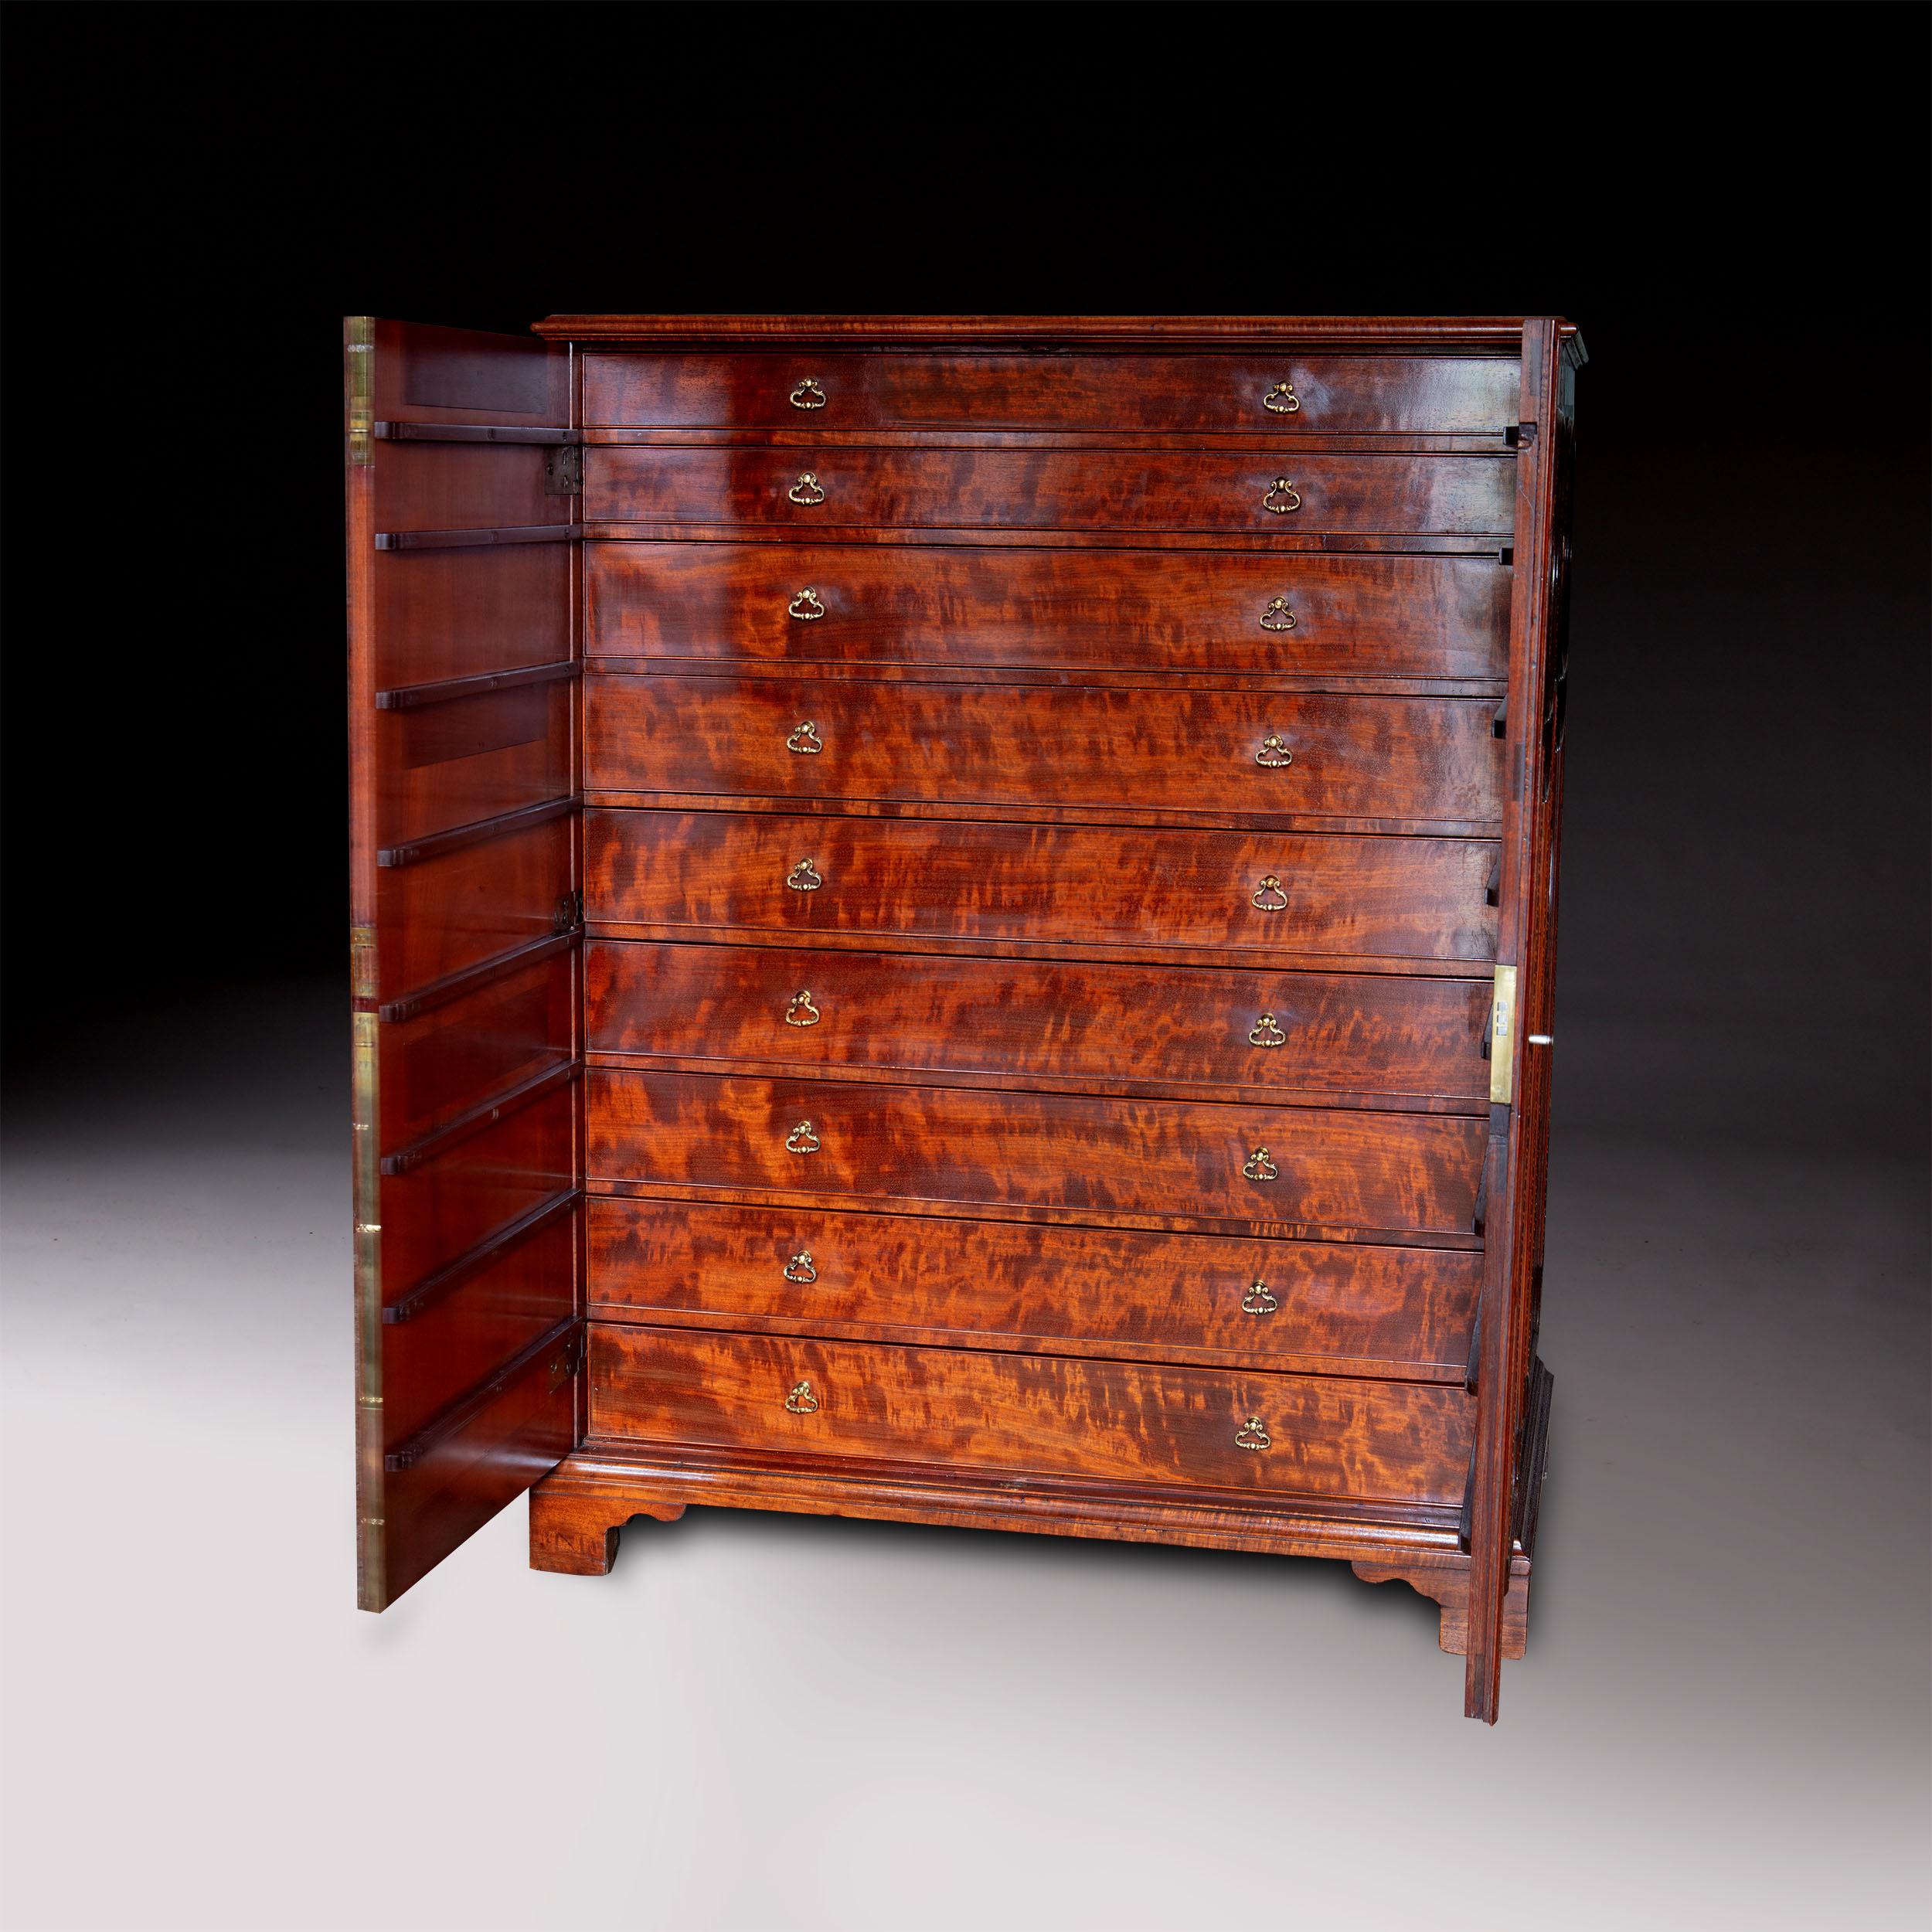 A magnificent late 18th-century flame mahogany collectors cabinet, the sides and doors inset with the most fabulous flame mahogany within raised borders of 'woven' boxwood and ebony, opening to nine long drawers with rich flame mahogany veneers and